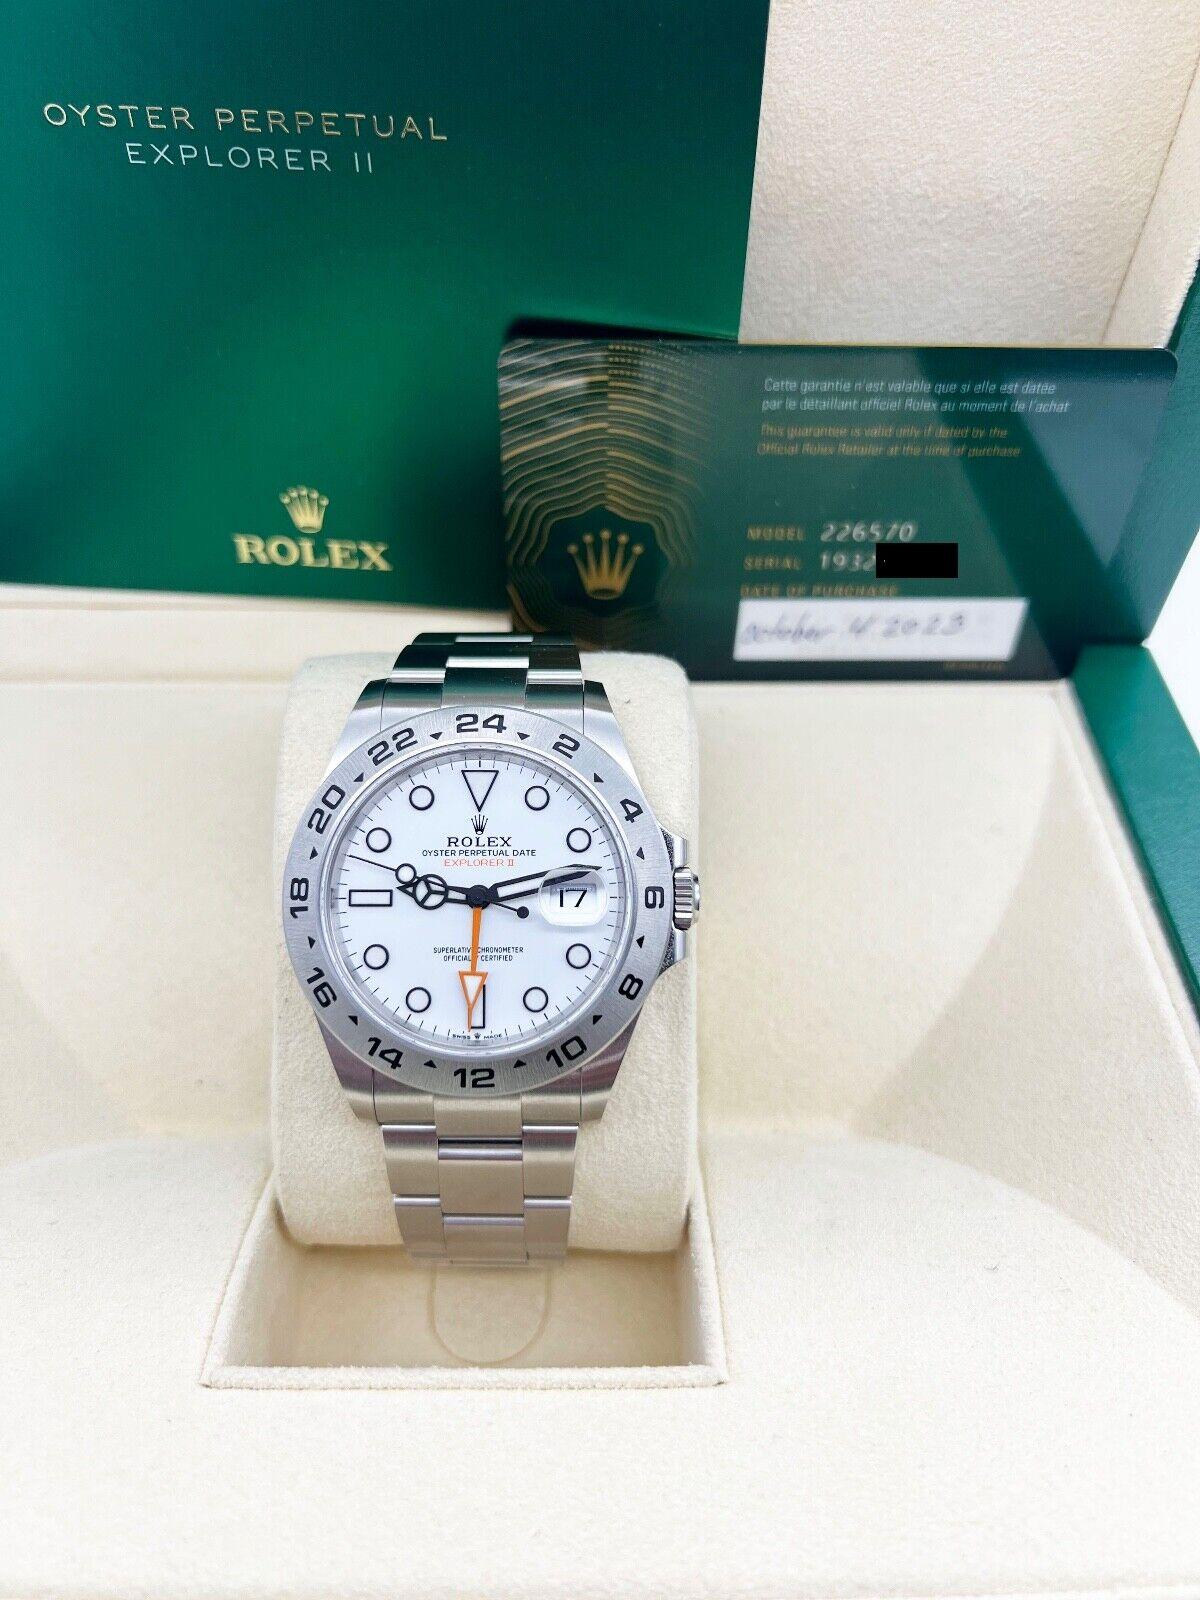 2023 Rolex 226570 Explorer II White Dial Stainless Steel Box Paper For Sale 3